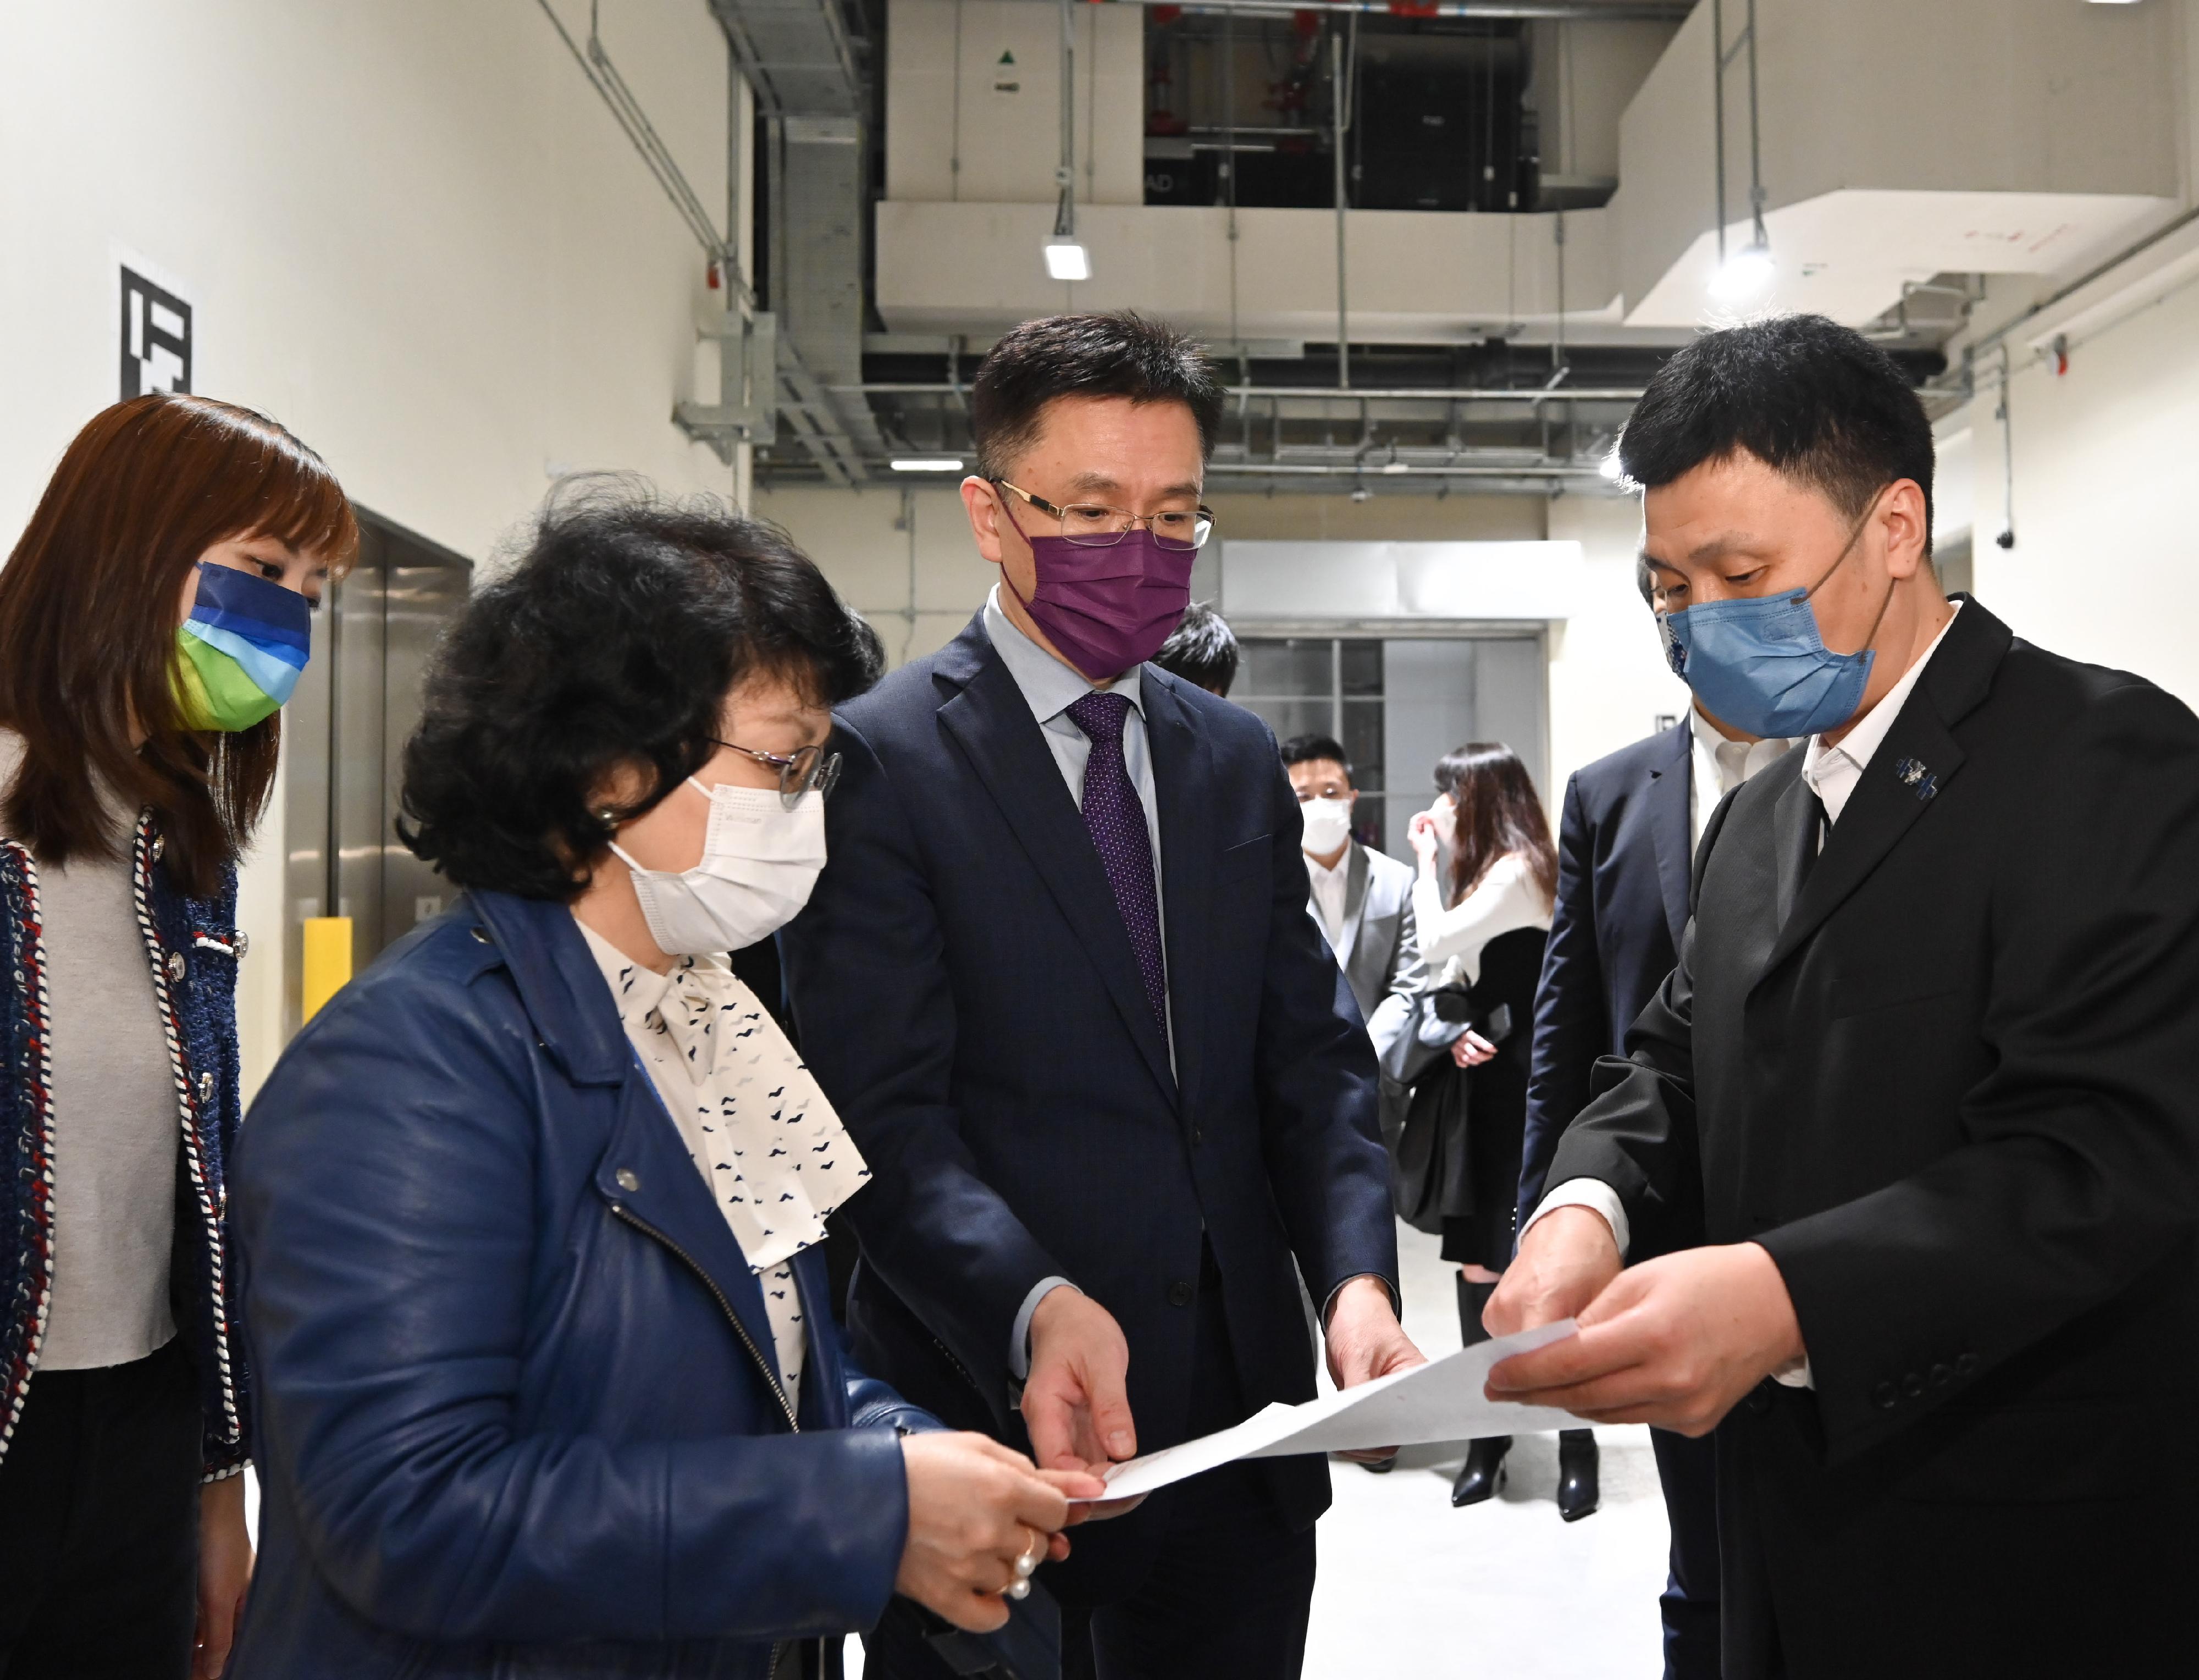 The Secretary for Innovation, Technology and Industry, Professor Sun Dong (second right), visits an enterprise in the Advanced Manufacturing Centre today (December 1) and receives a briefing on design and manufacturing of commercial aerospace satellites. Looking on is the Under Secretary for Innovation, Technology and Industry, Ms Lillian Cheong (first left).